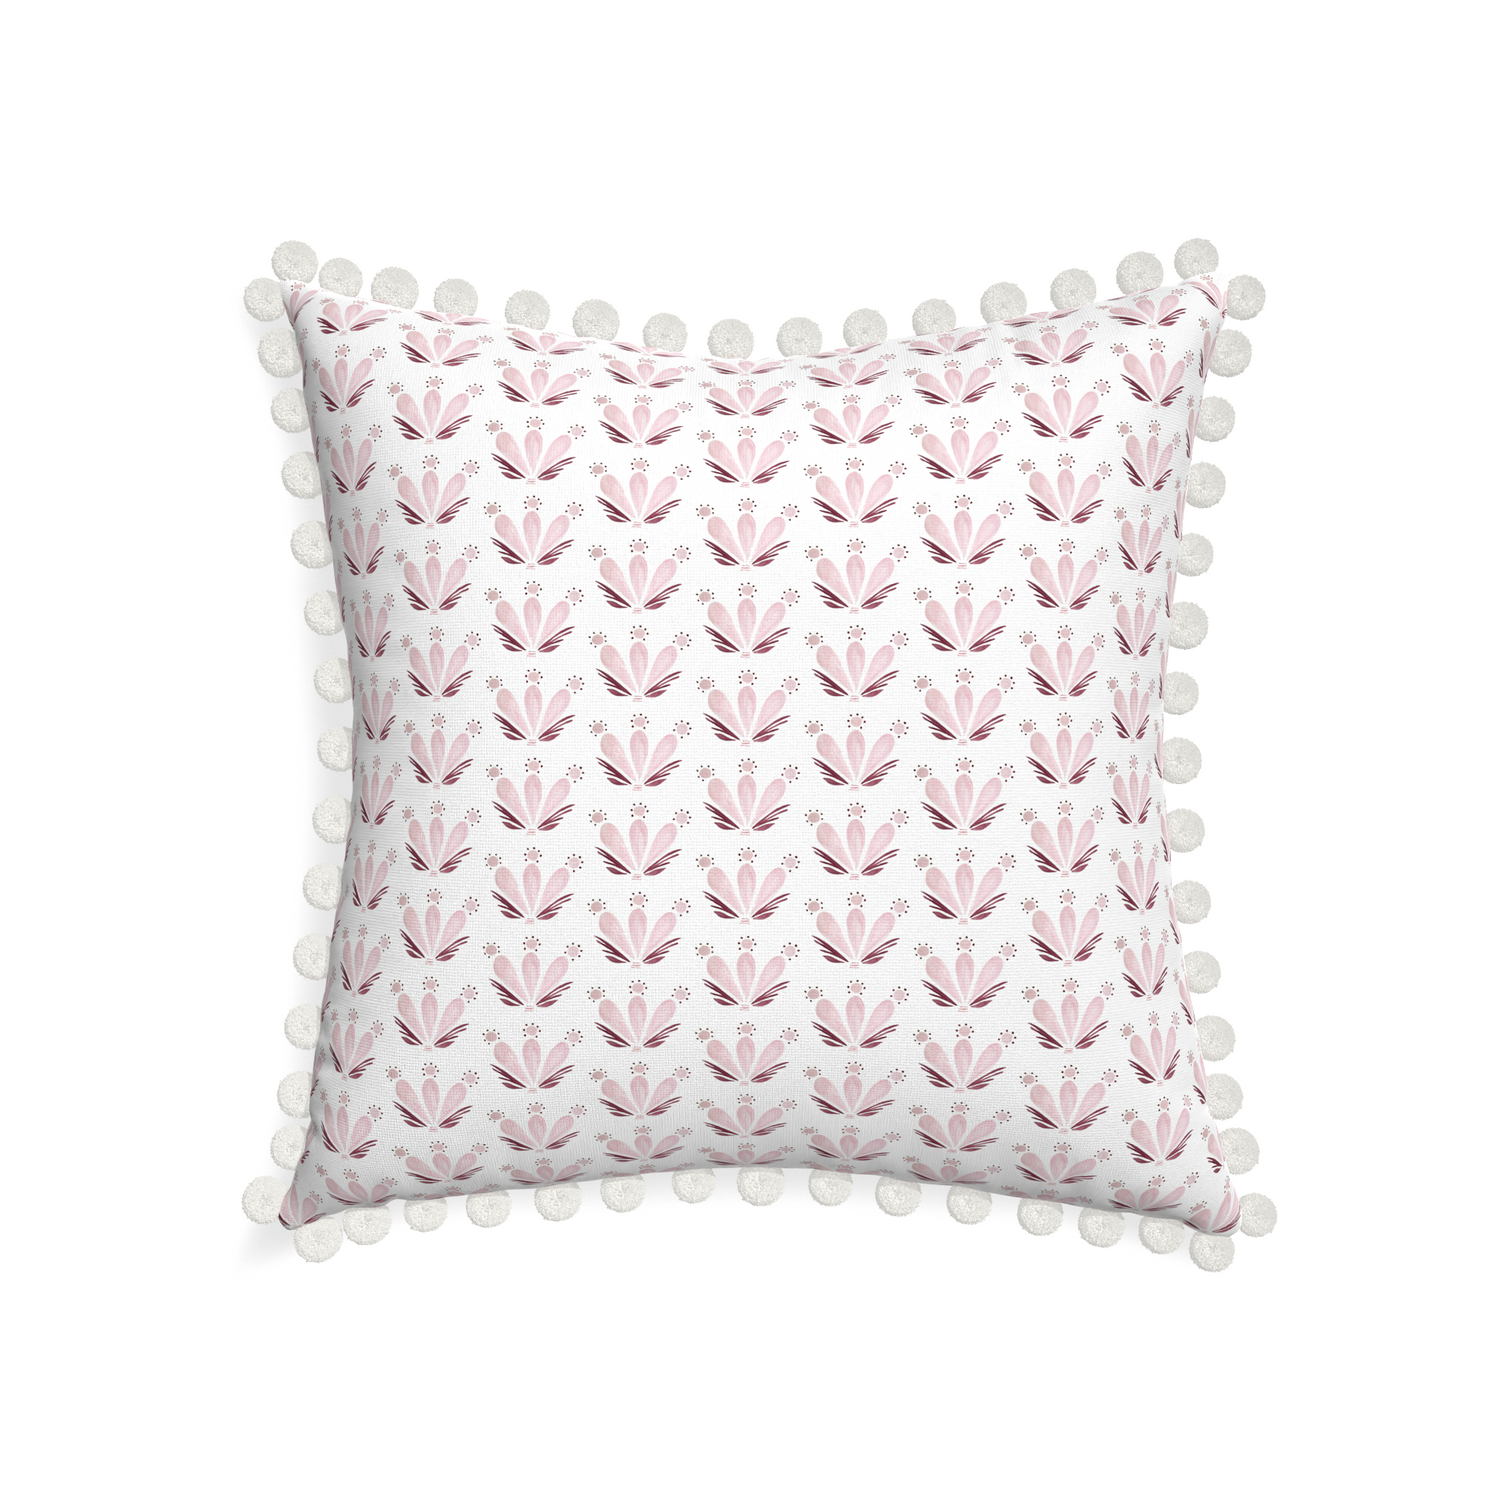 22-square serena pink custom pink & burgundy drop repeat floralpillow with snow pom pom on white background